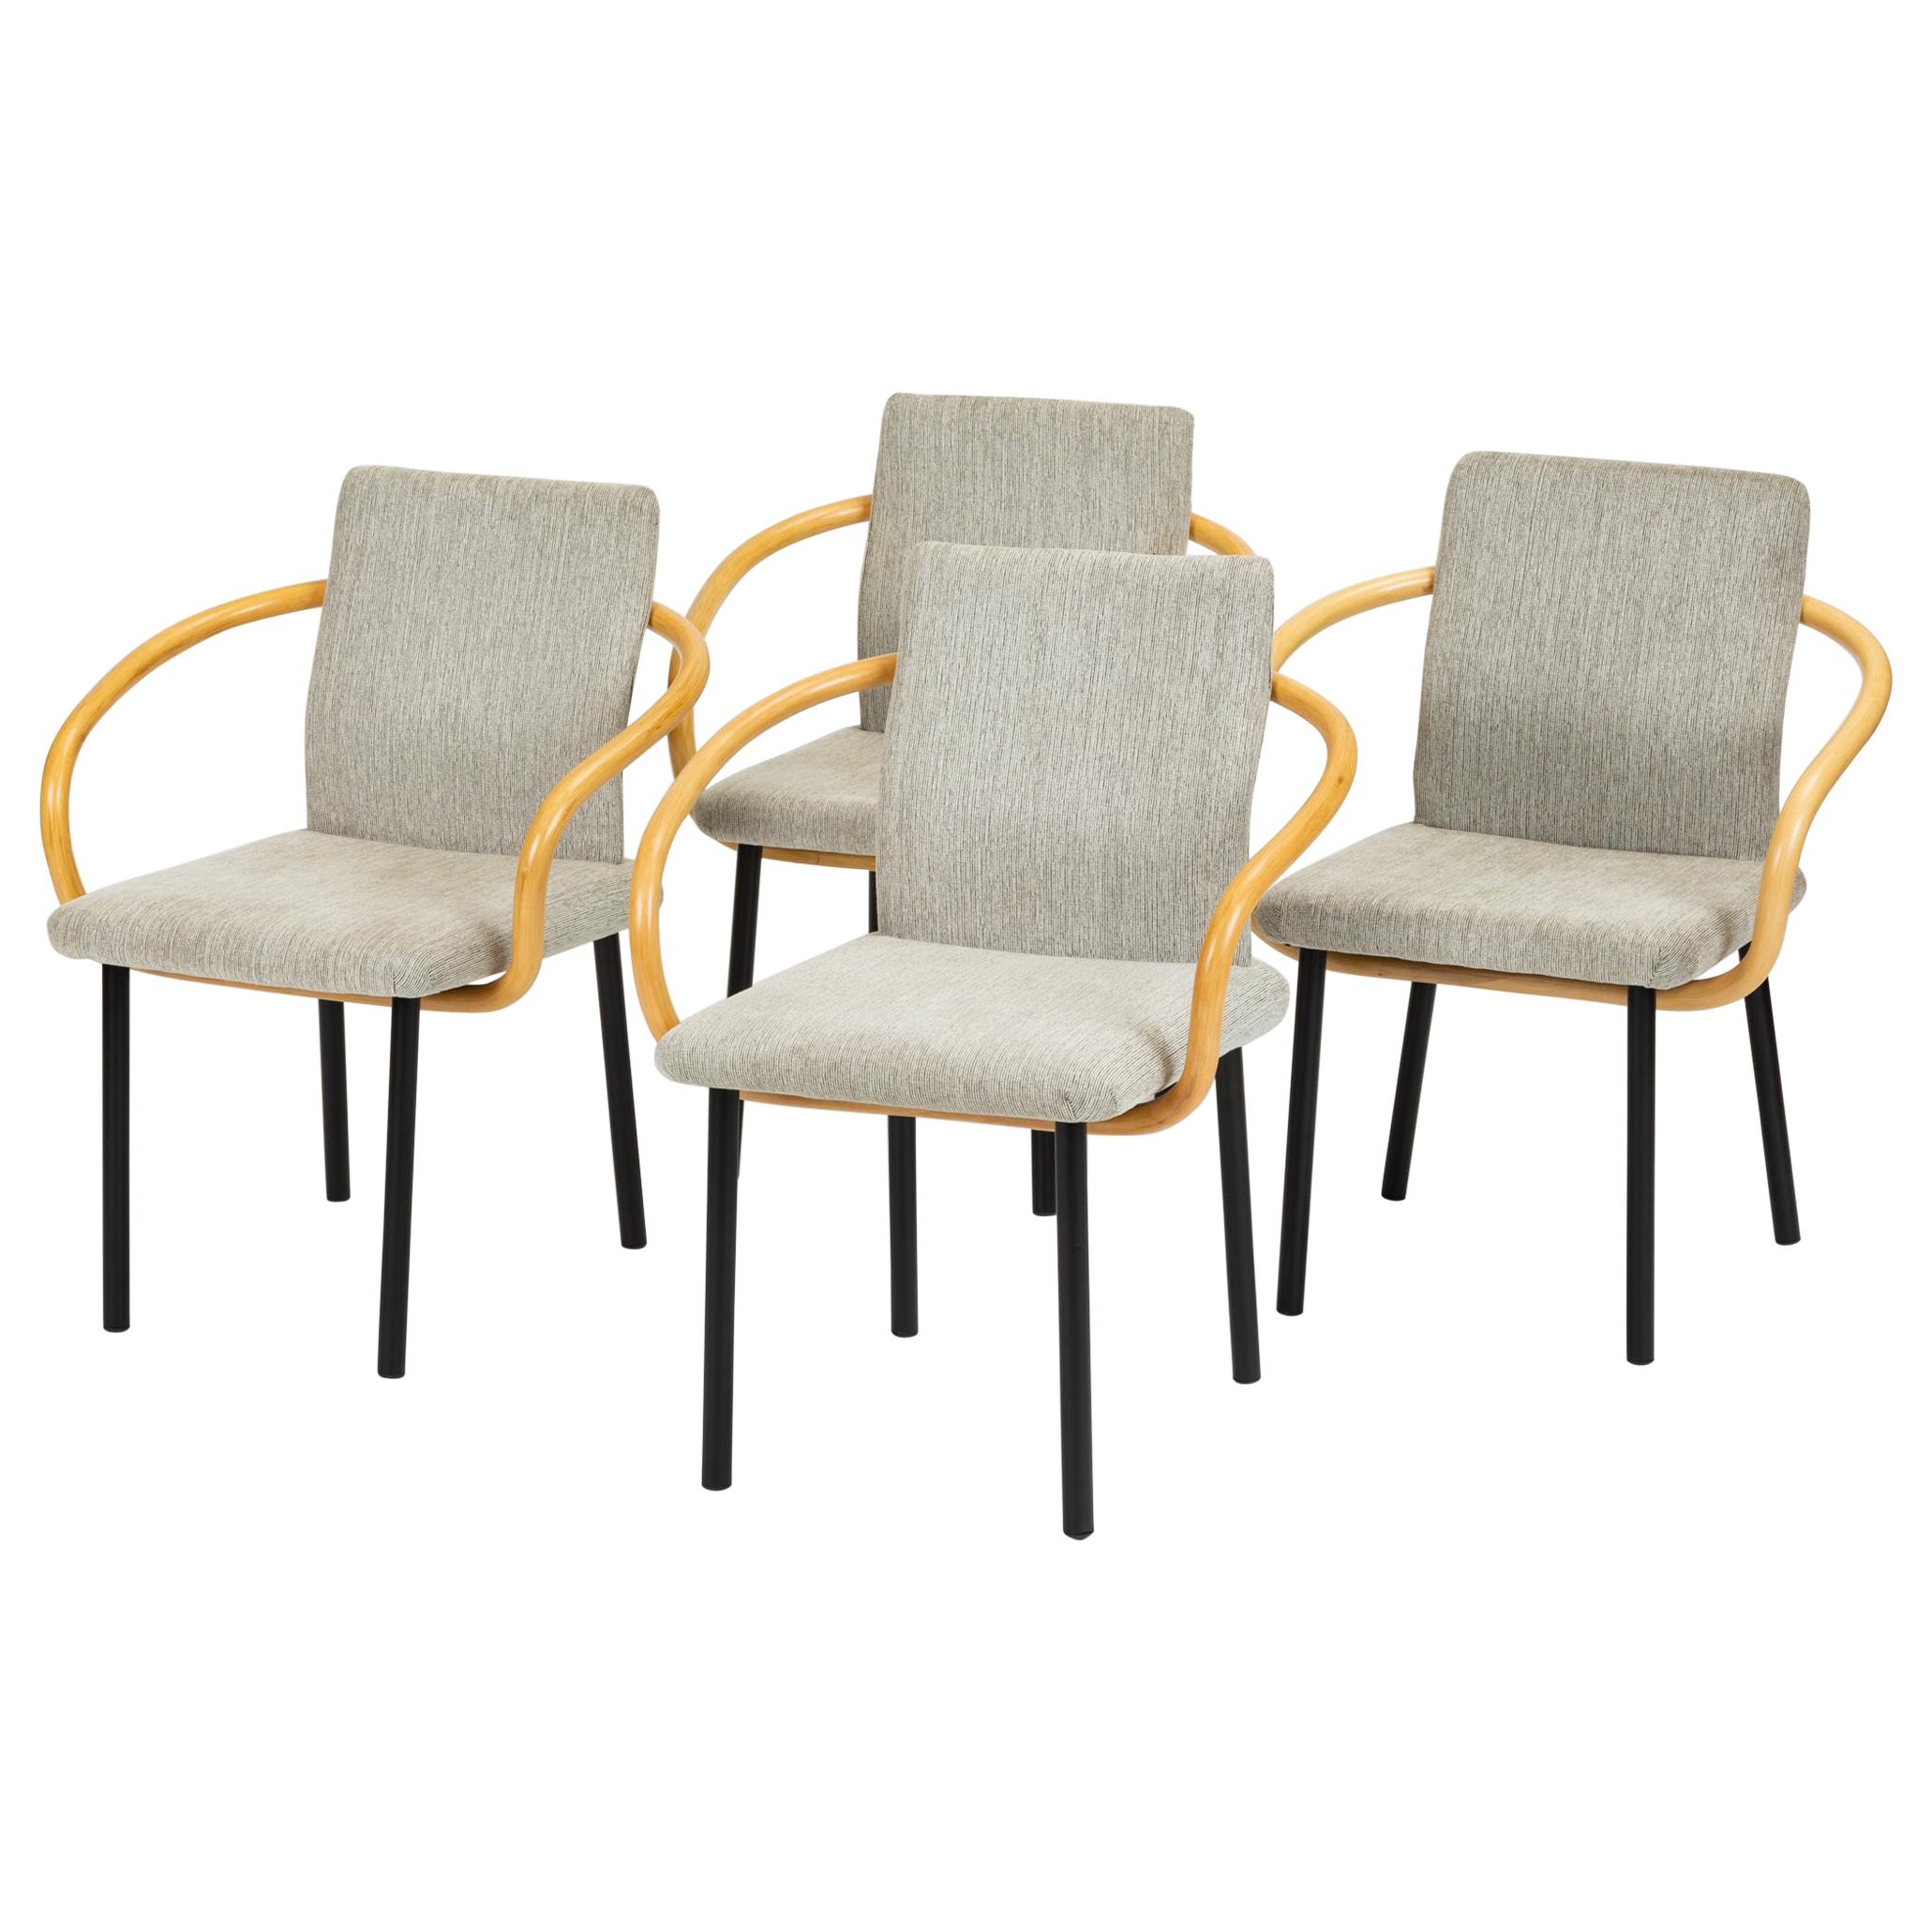 Set of Four of Ettore Sottsass for Knoll Bamboo Mandarin Chairs